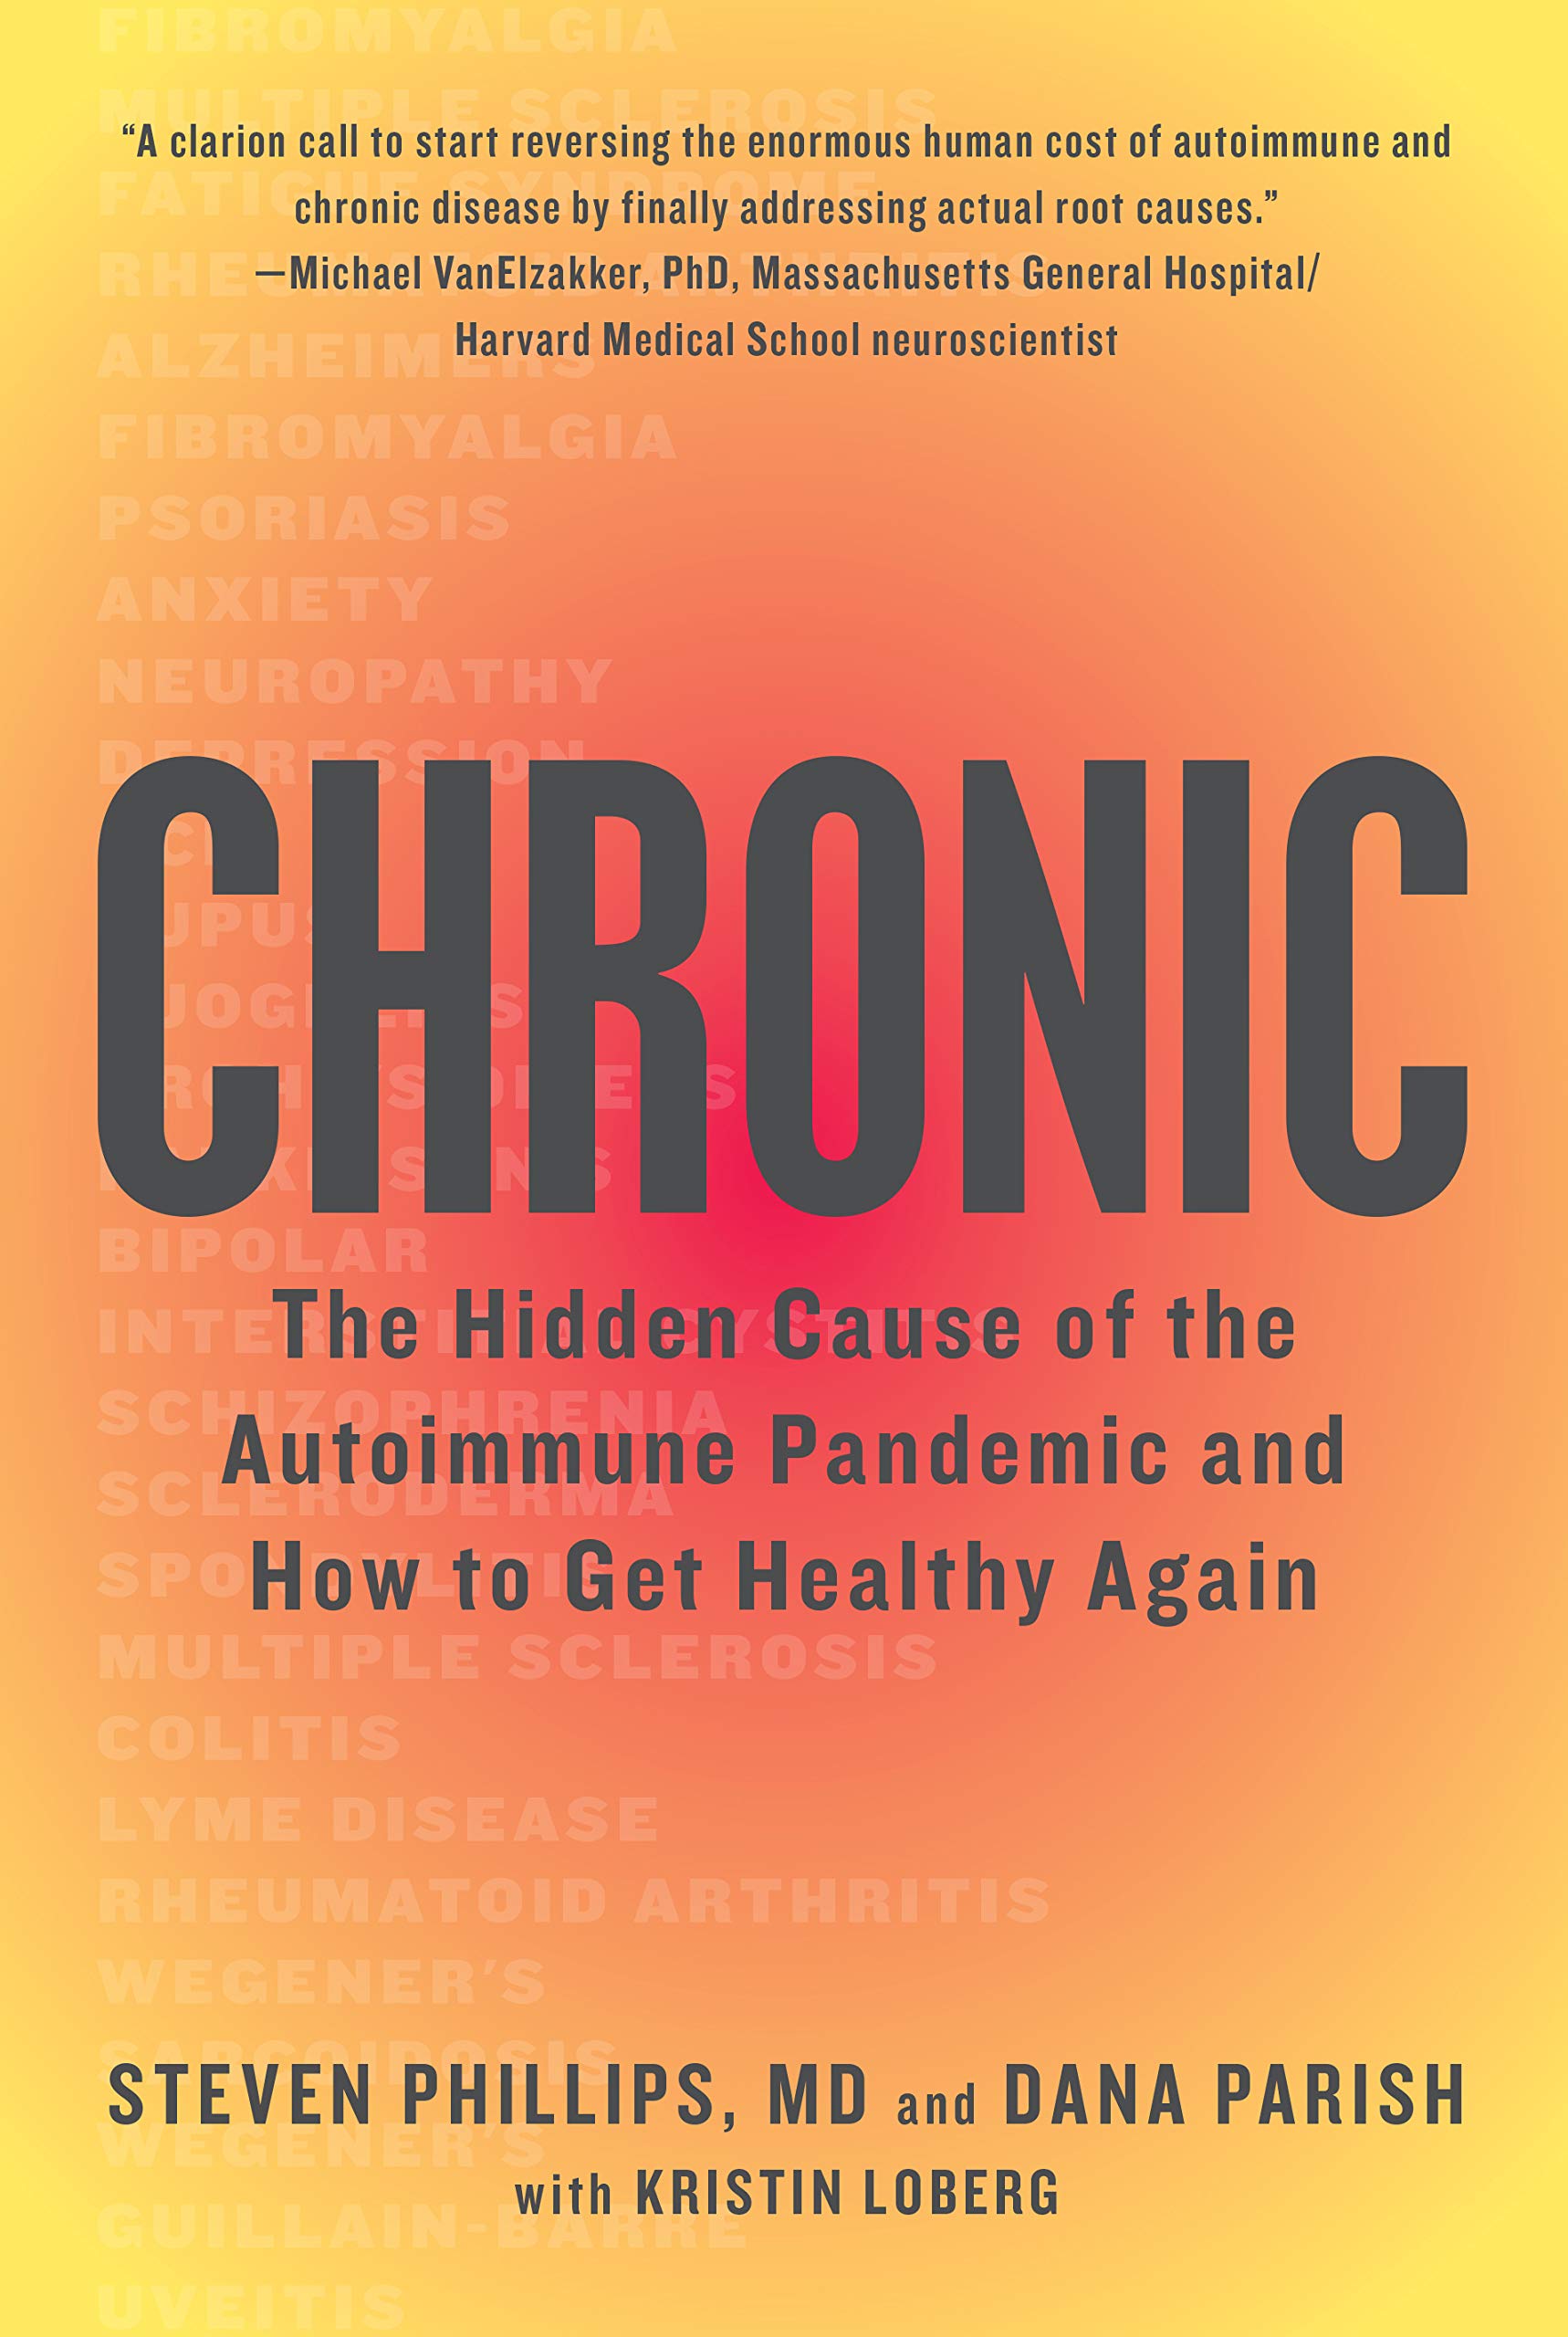 Chronic: The Hidden Cause of the Autoimmune Pandemic and How to Get Healthy Again By Dr. Steven Phillips and Dana Parish